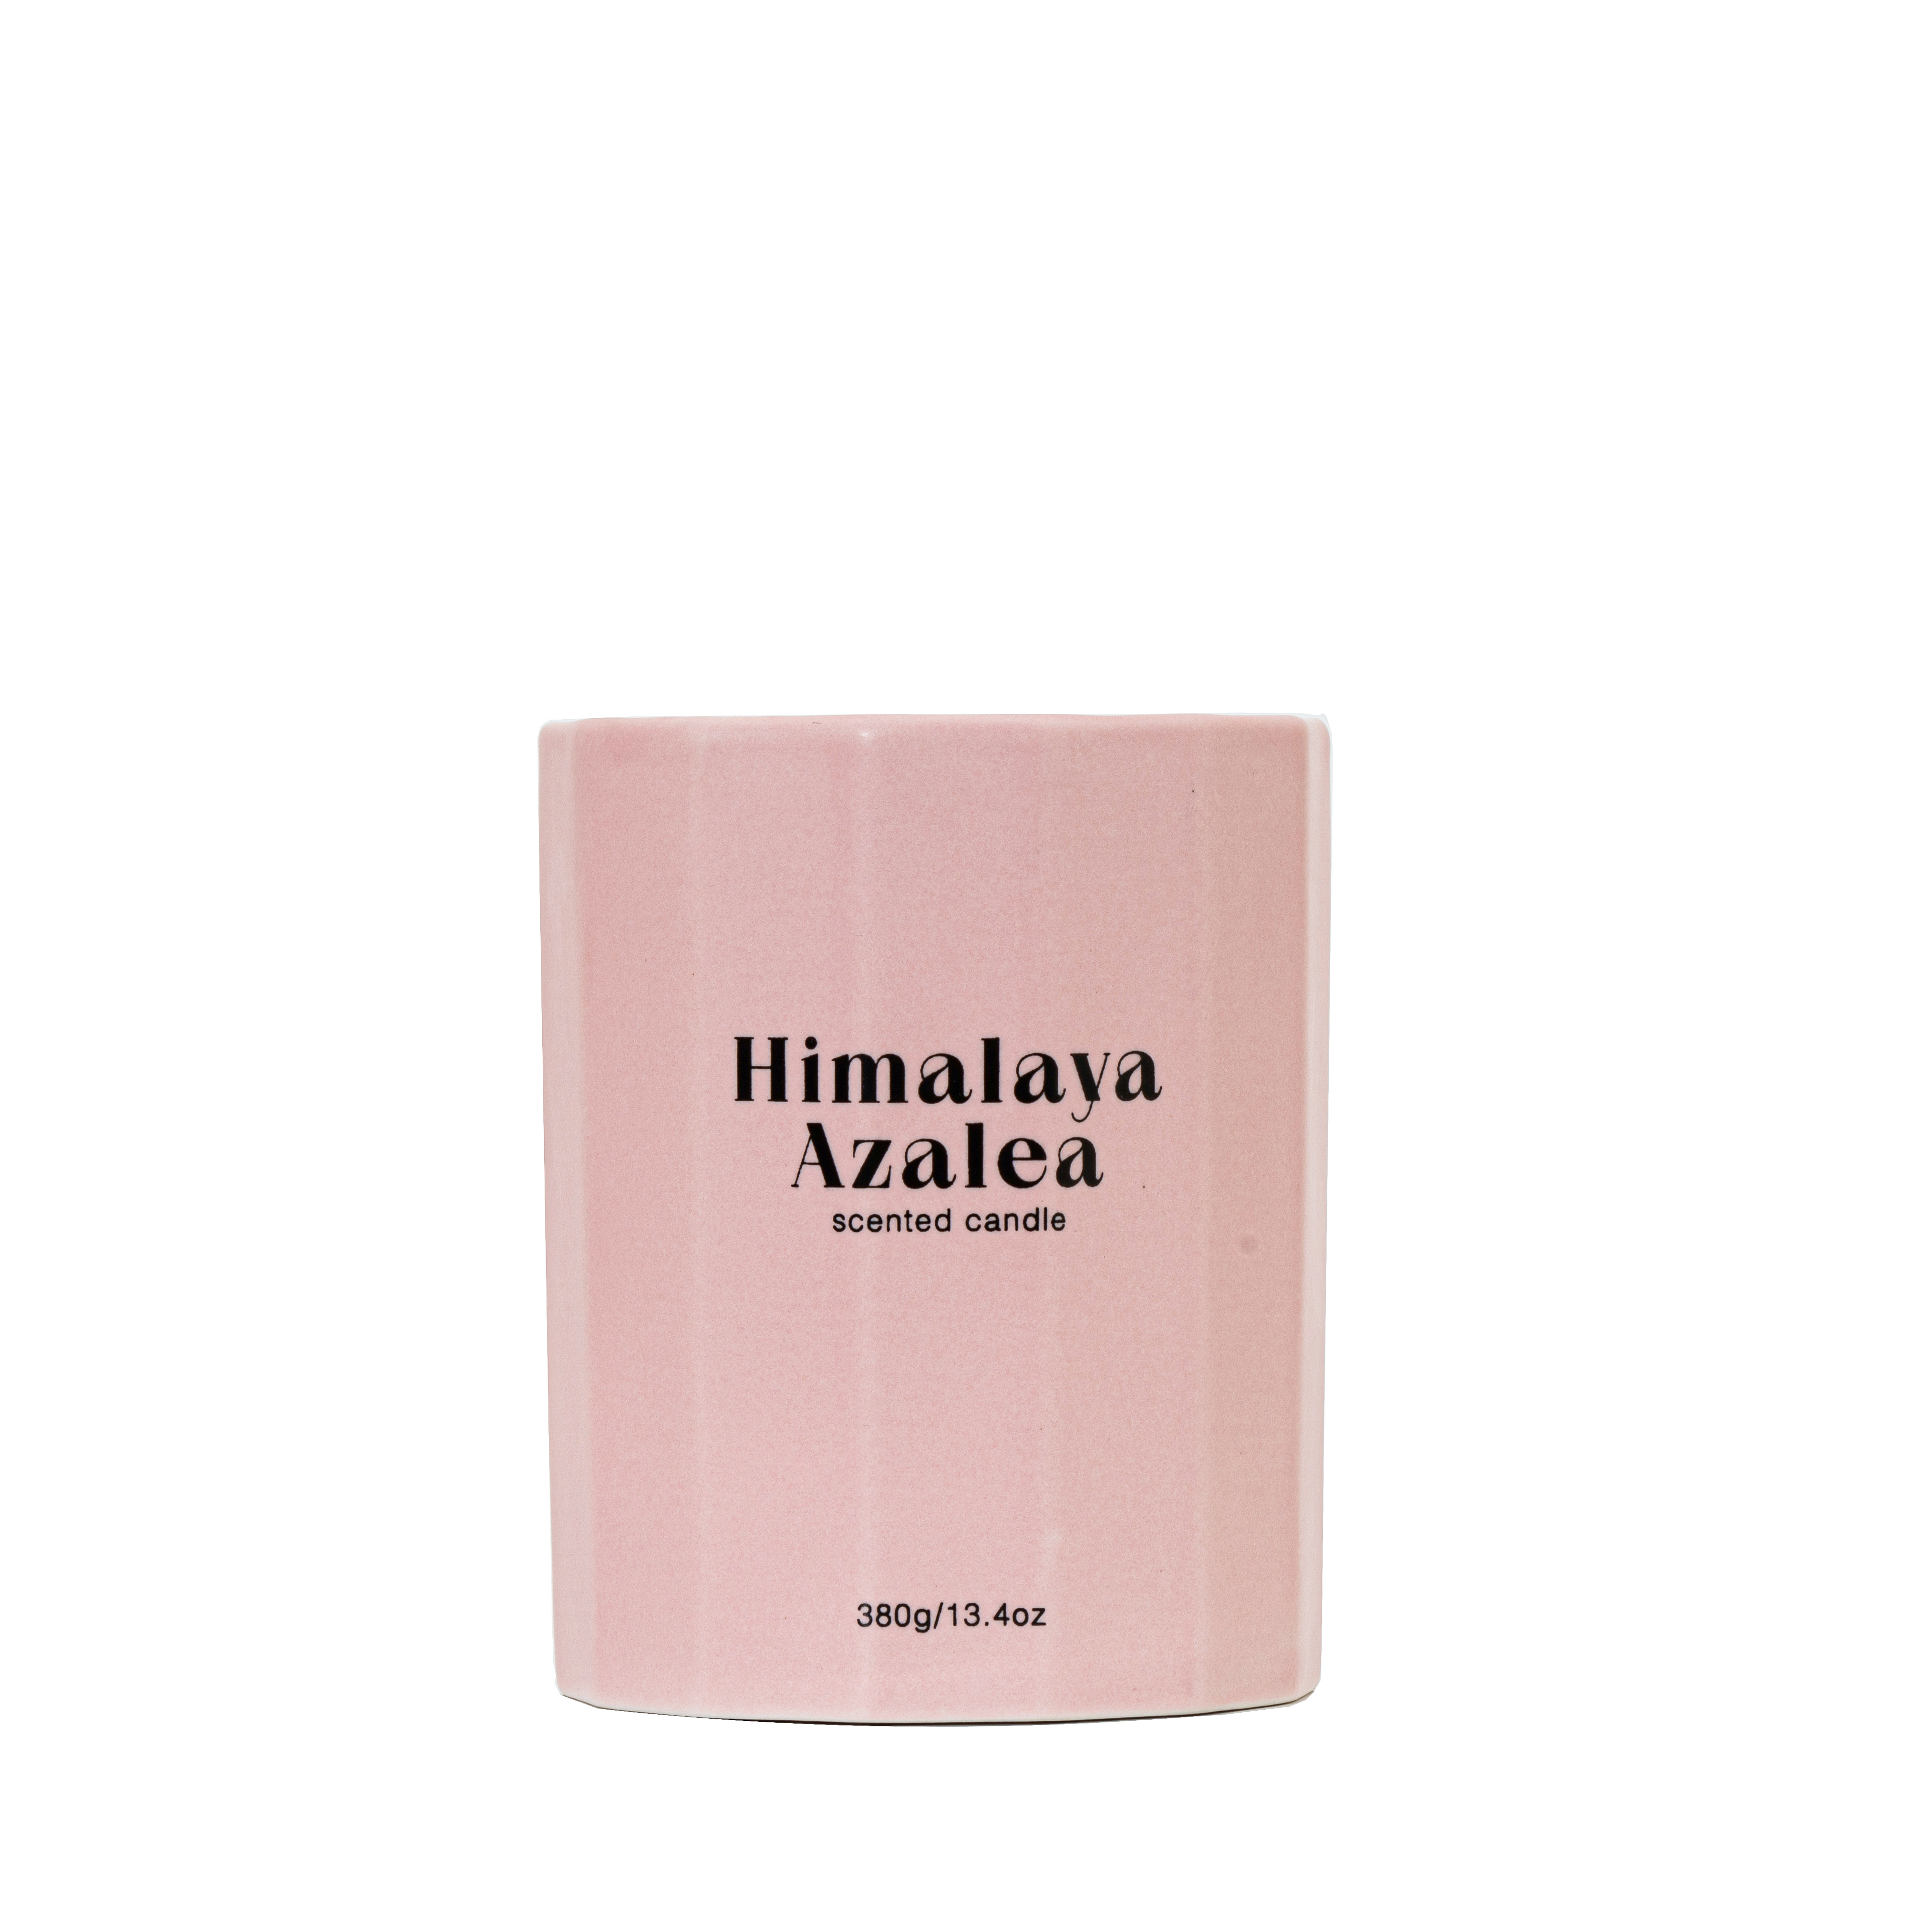 WOODWICK IS ON Collection Scented Candle Himalaya Azalea Pink Ceramic Jar 380g